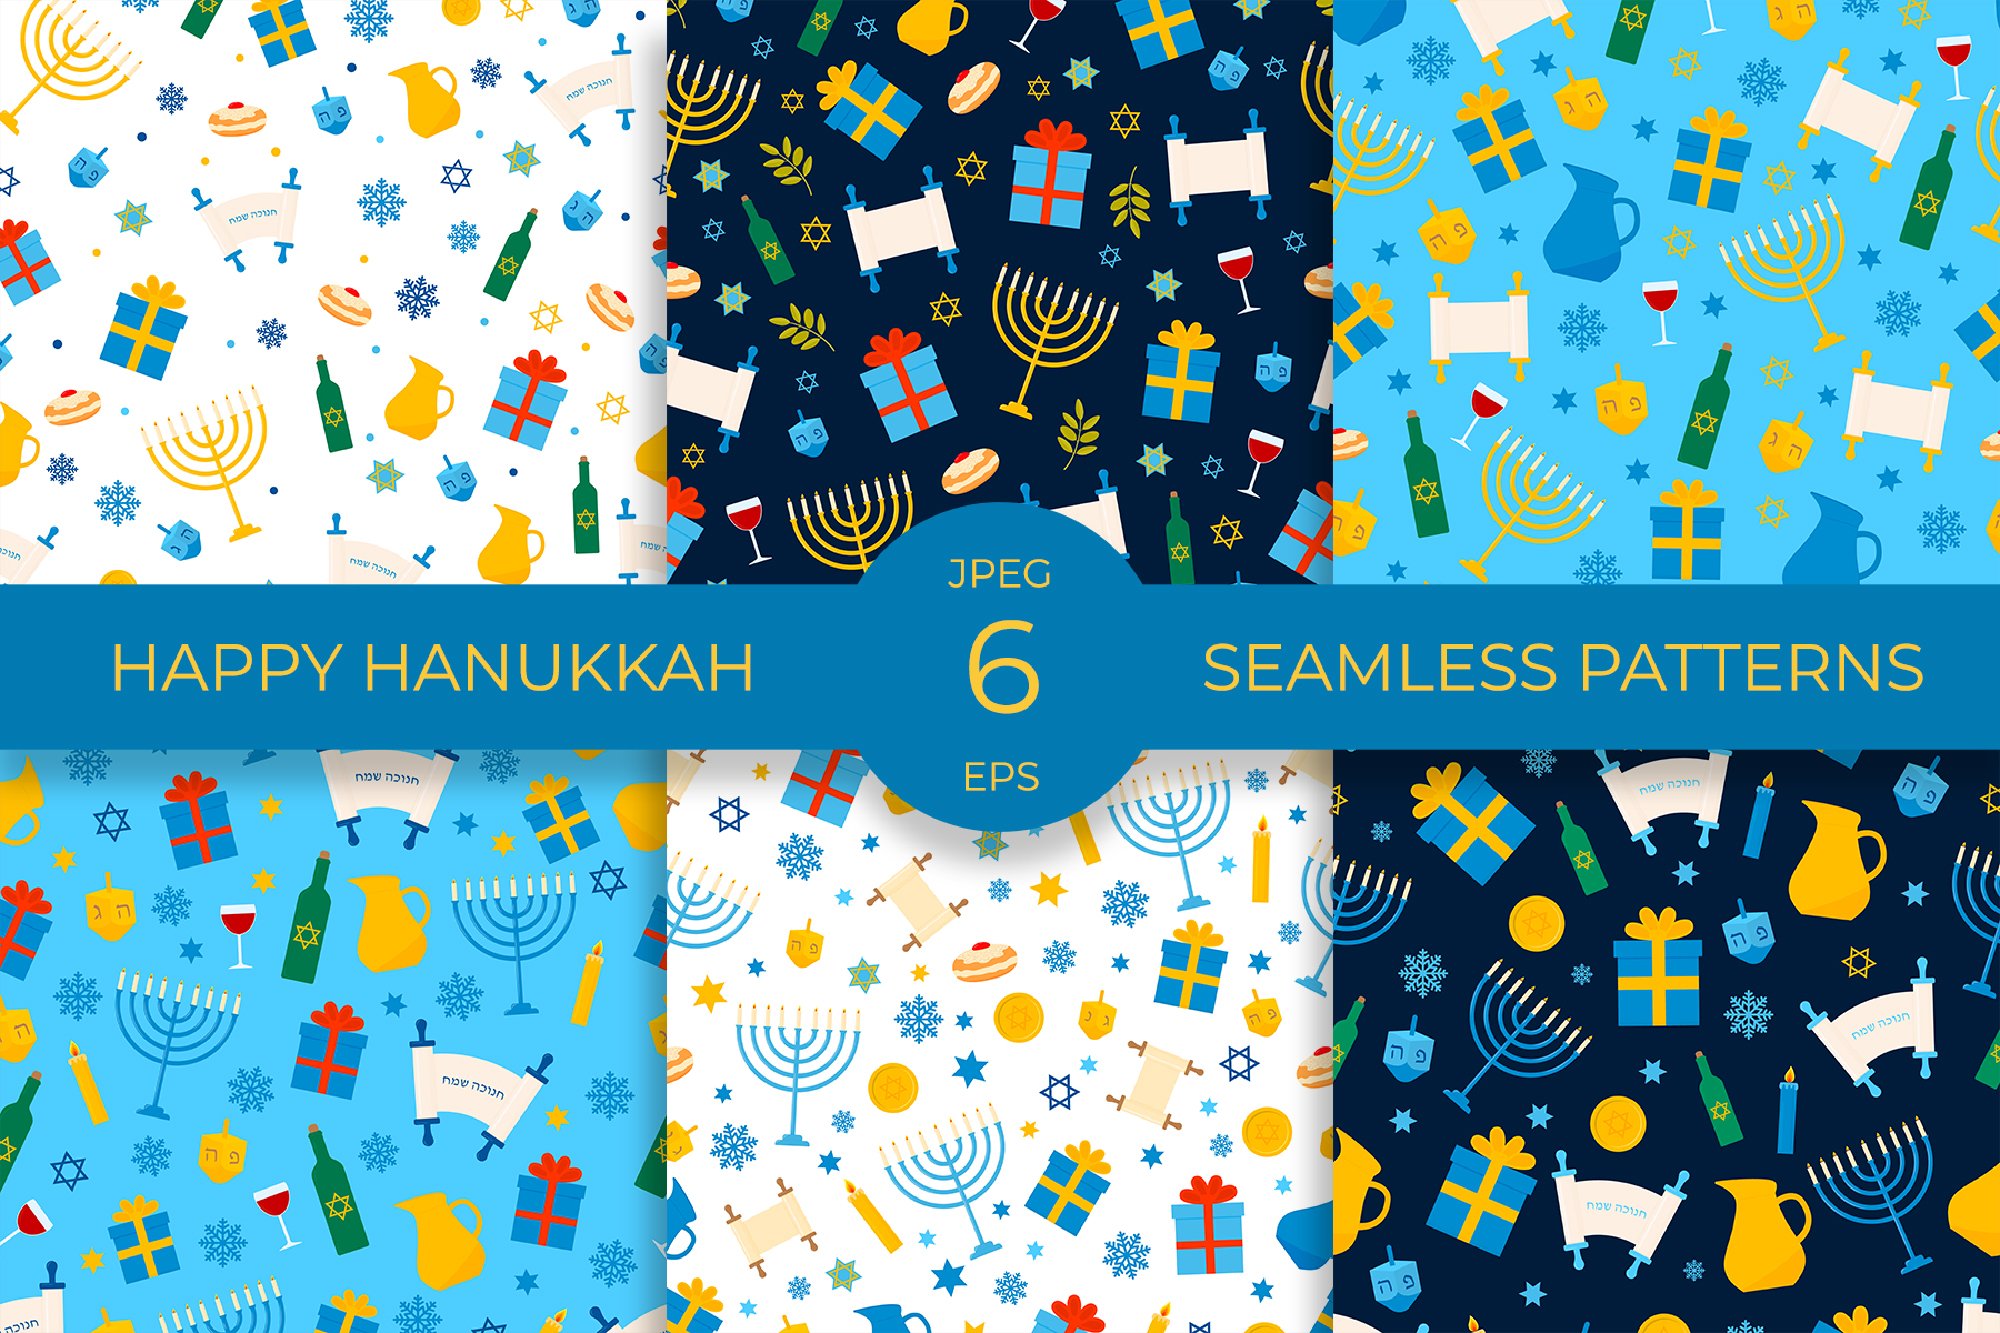 Beautiful different textures with Hanukkah themed images.